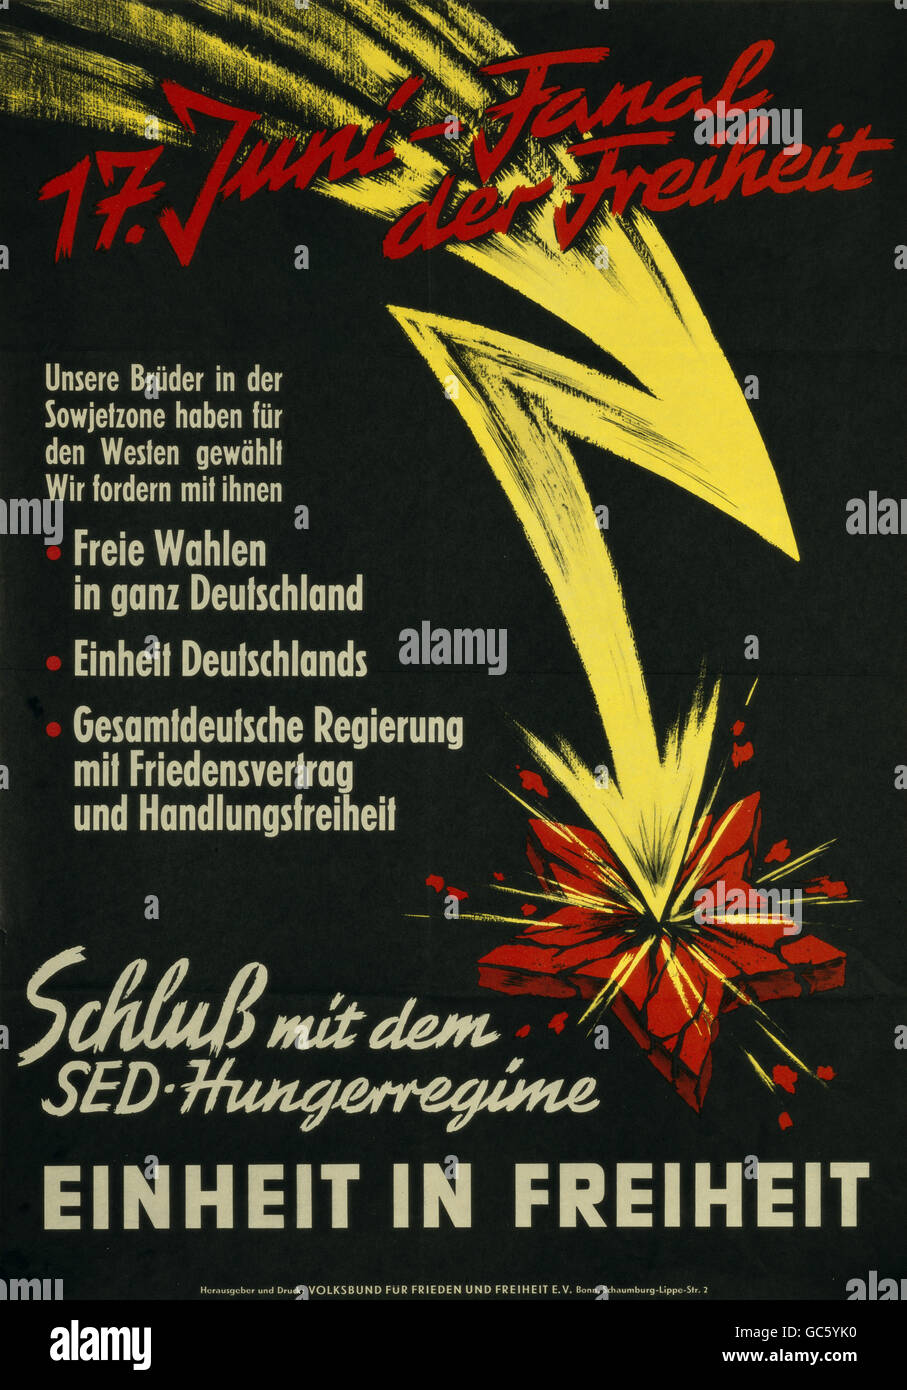 geography / travel, Germany, politics, Volksbund fuer Frieden und Freiheit (VFF), poster, '17th June - signal of freedom', Bonn, 1953, Additional-Rights-Clearences-Not Available Stock Photo